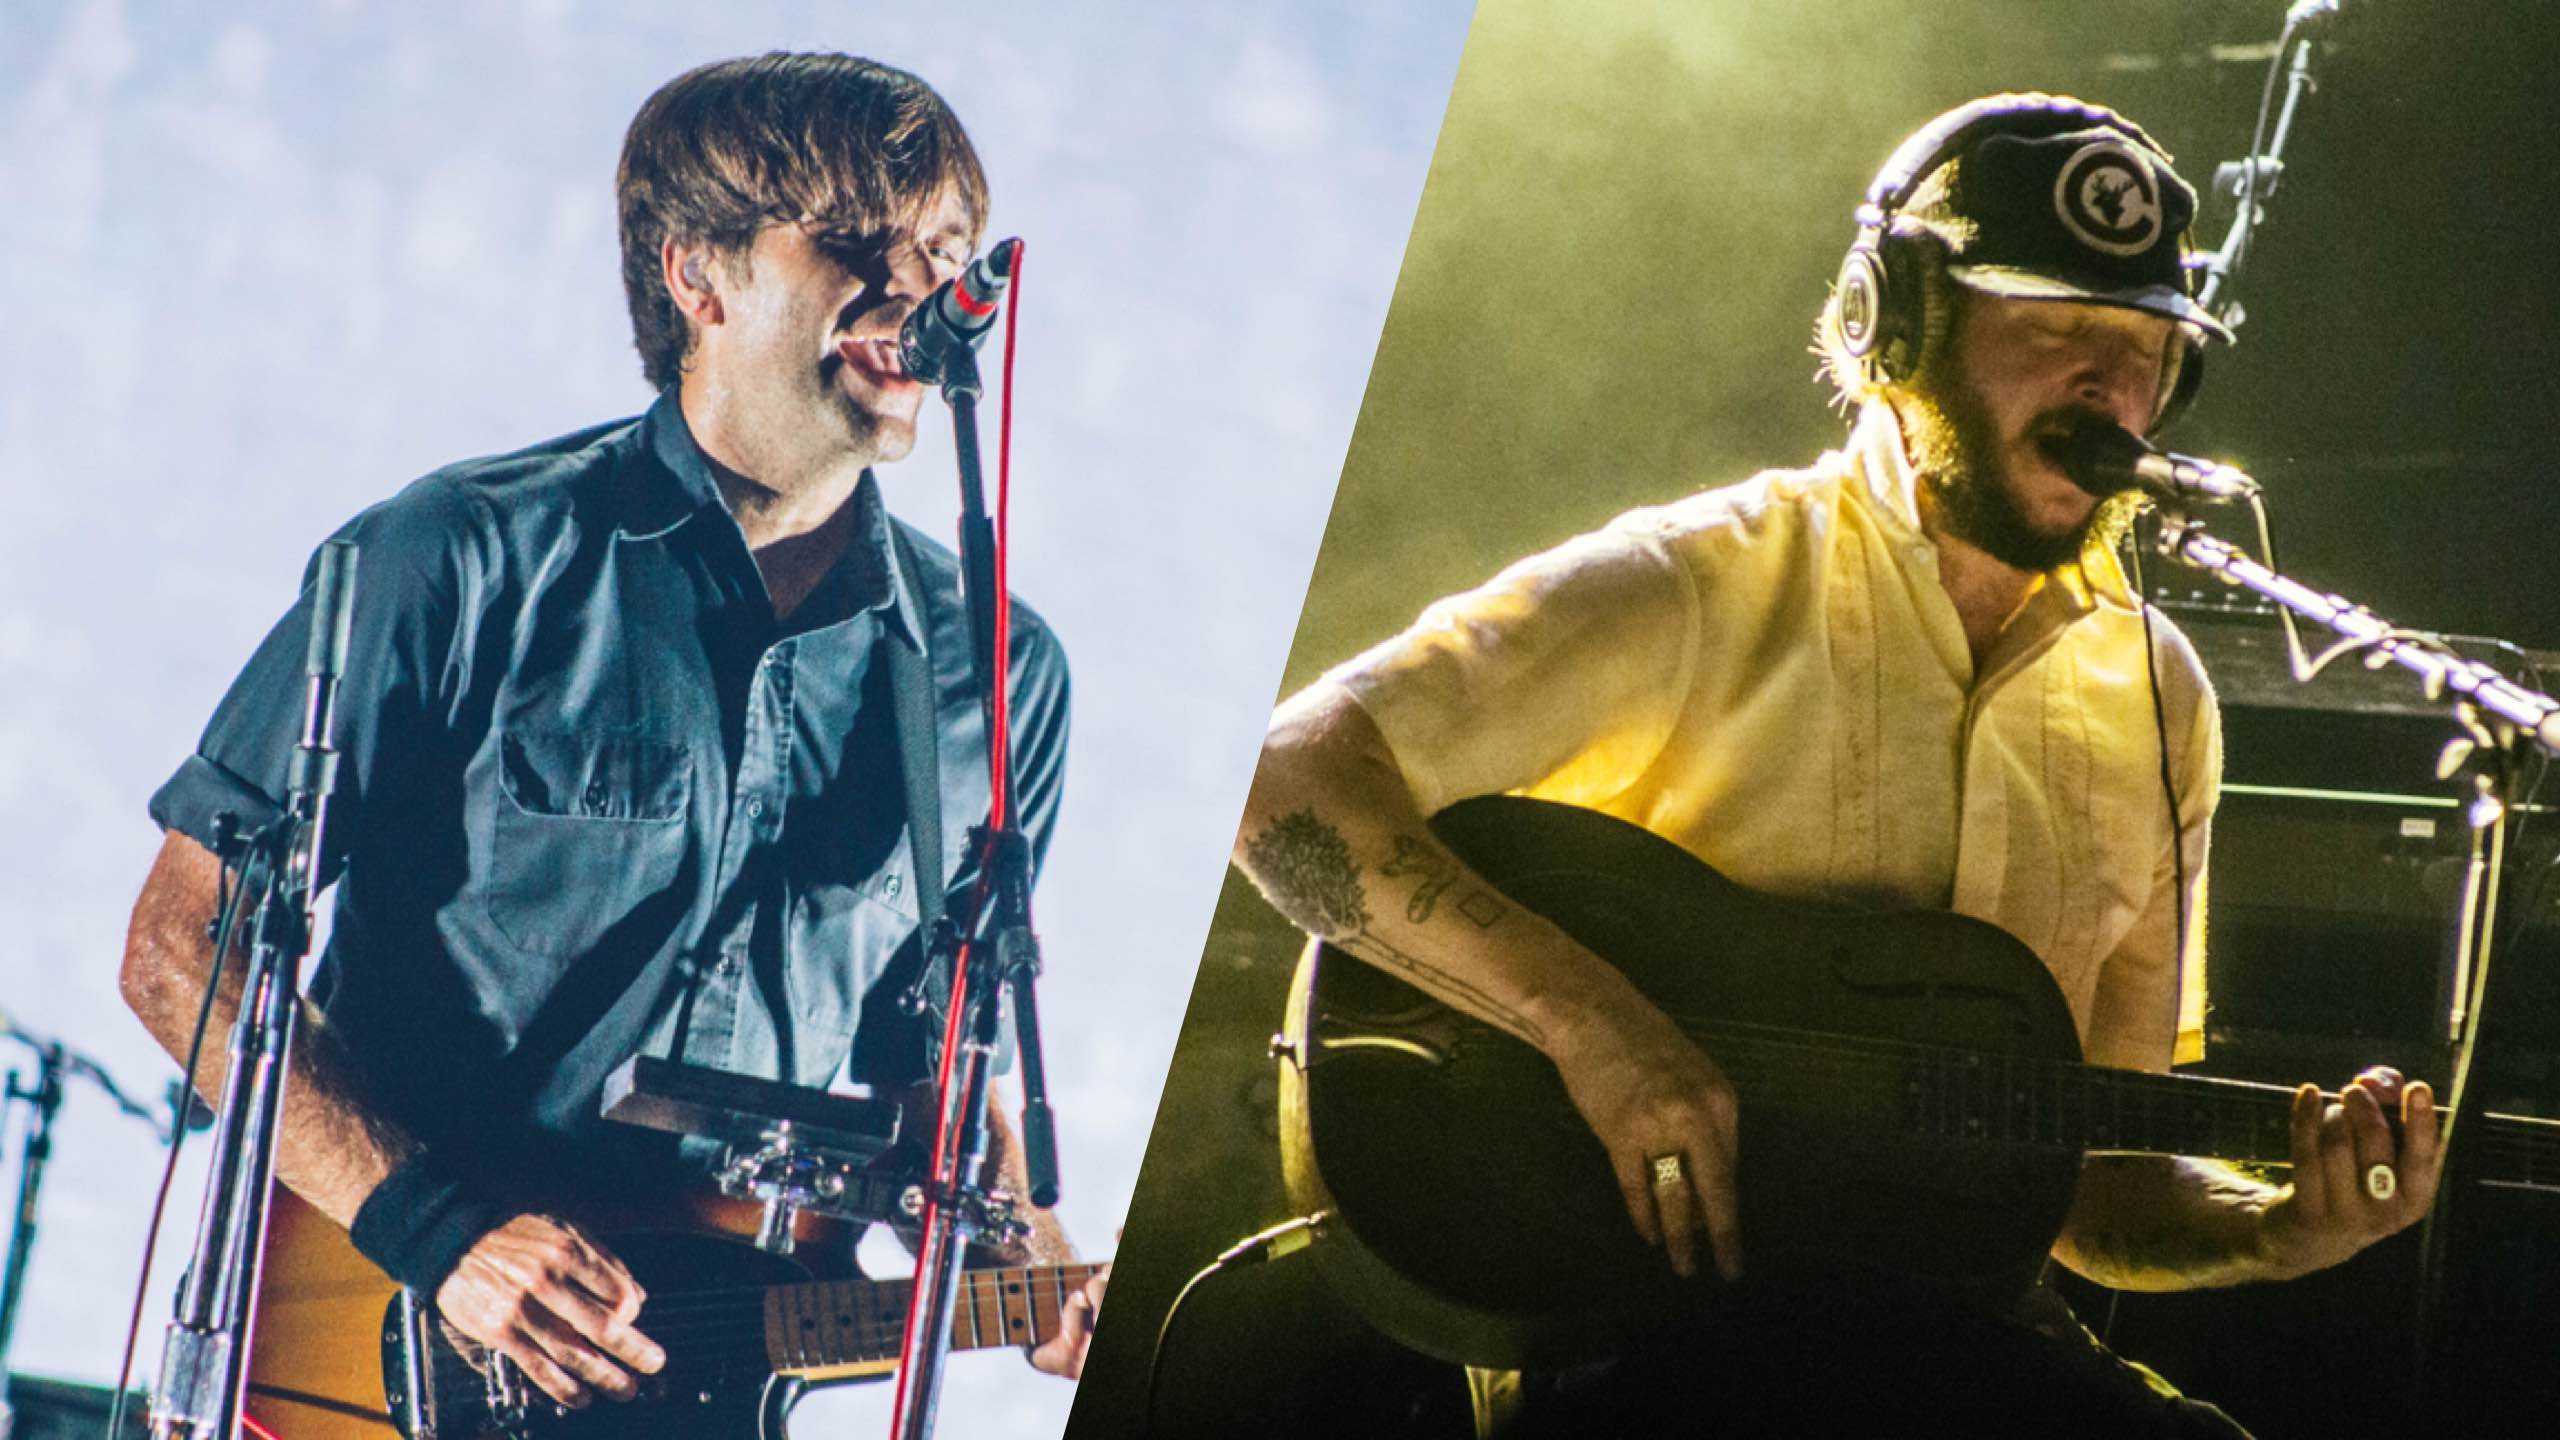 IN PHOTOS: Bon Iver, Death Cab for Cutie, and more thrill fans at Wanderland 2016